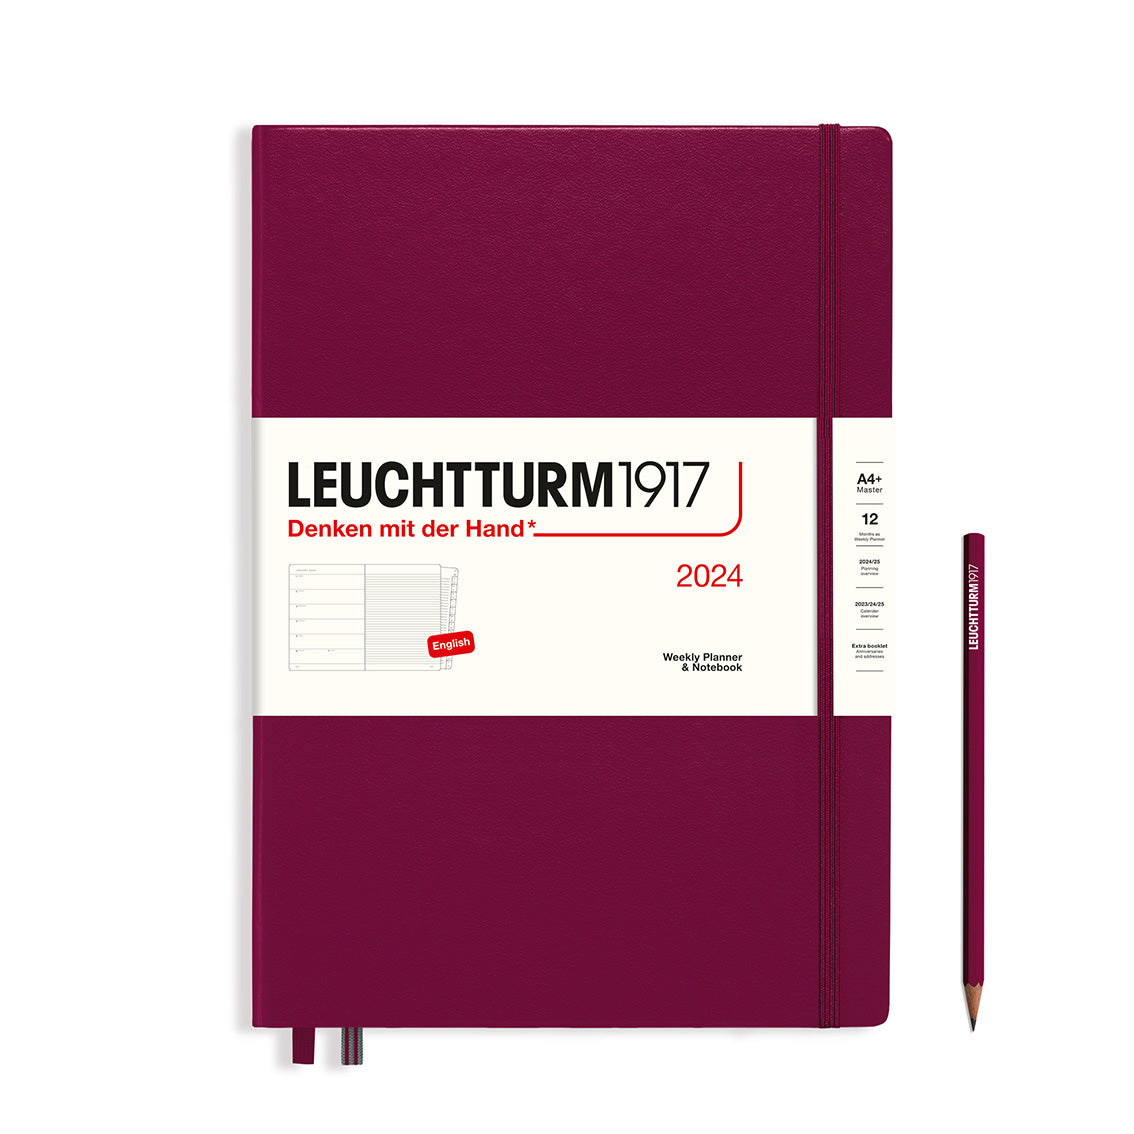 Leuchtturm1917 Weekly Planner & Notebook 2024 (A4+) Port Red - Blesket Canada